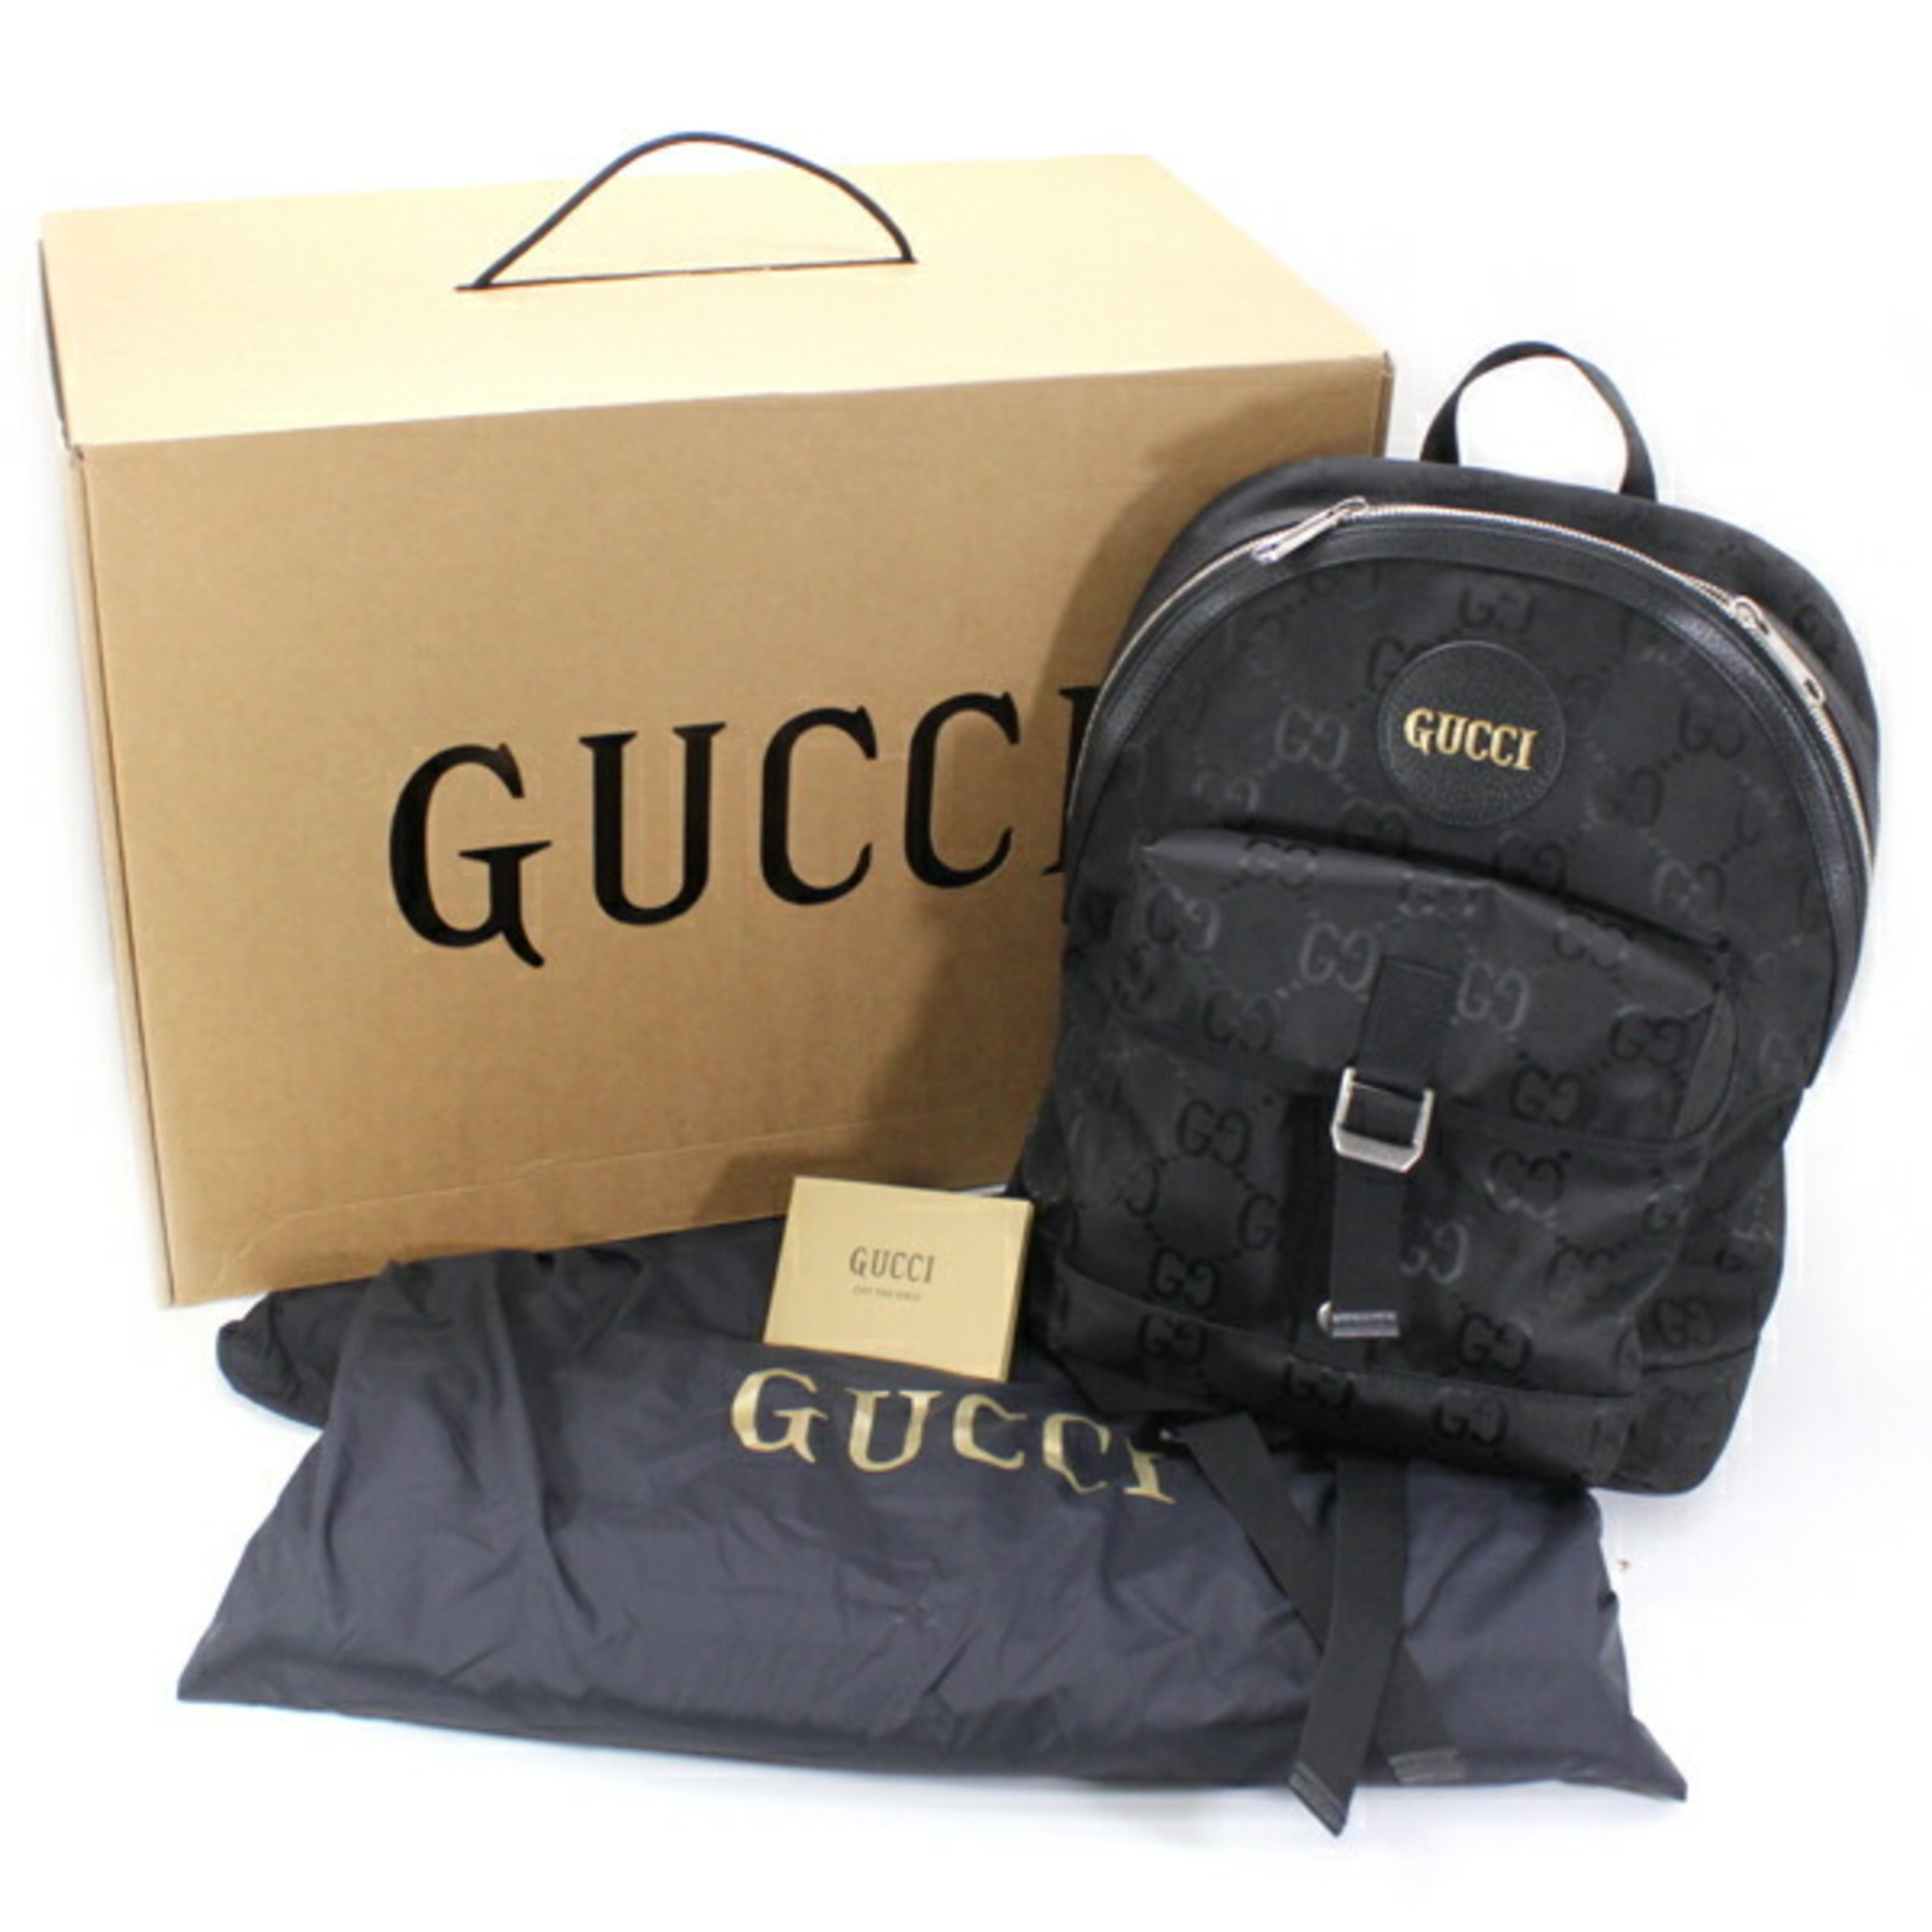 Gucci Off The Grid Backpack Black GG Nylon Canvas Men's 644992 T4775